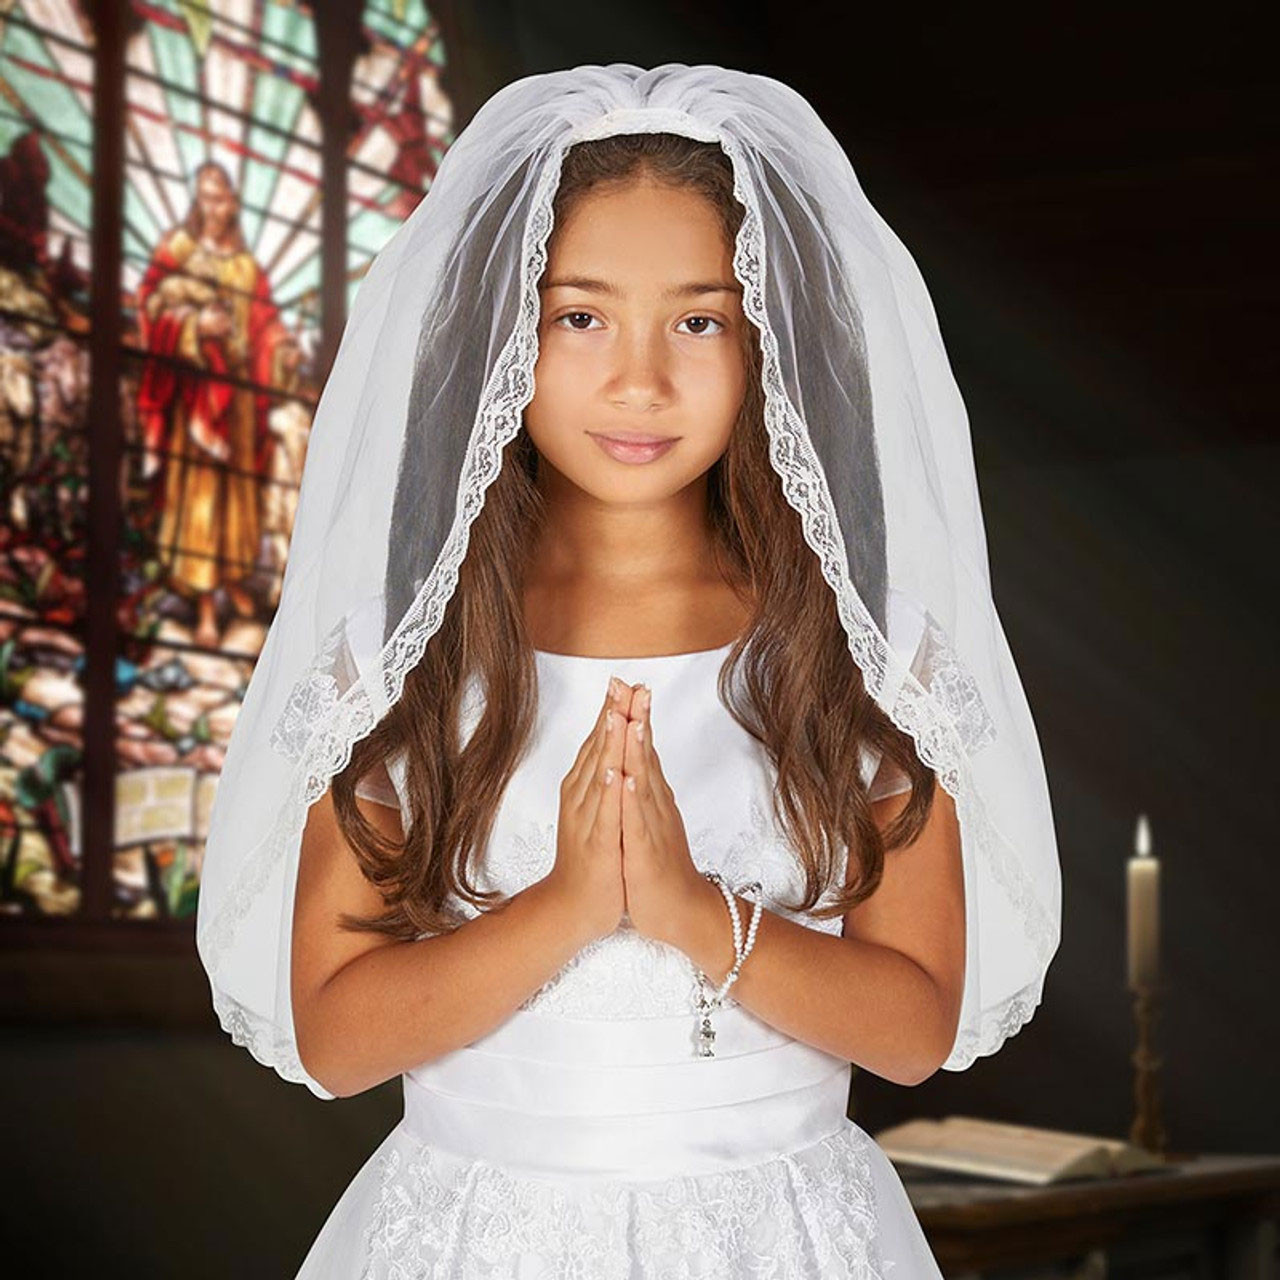 First Holy Communion Lace Trim Veil shown in a church setting